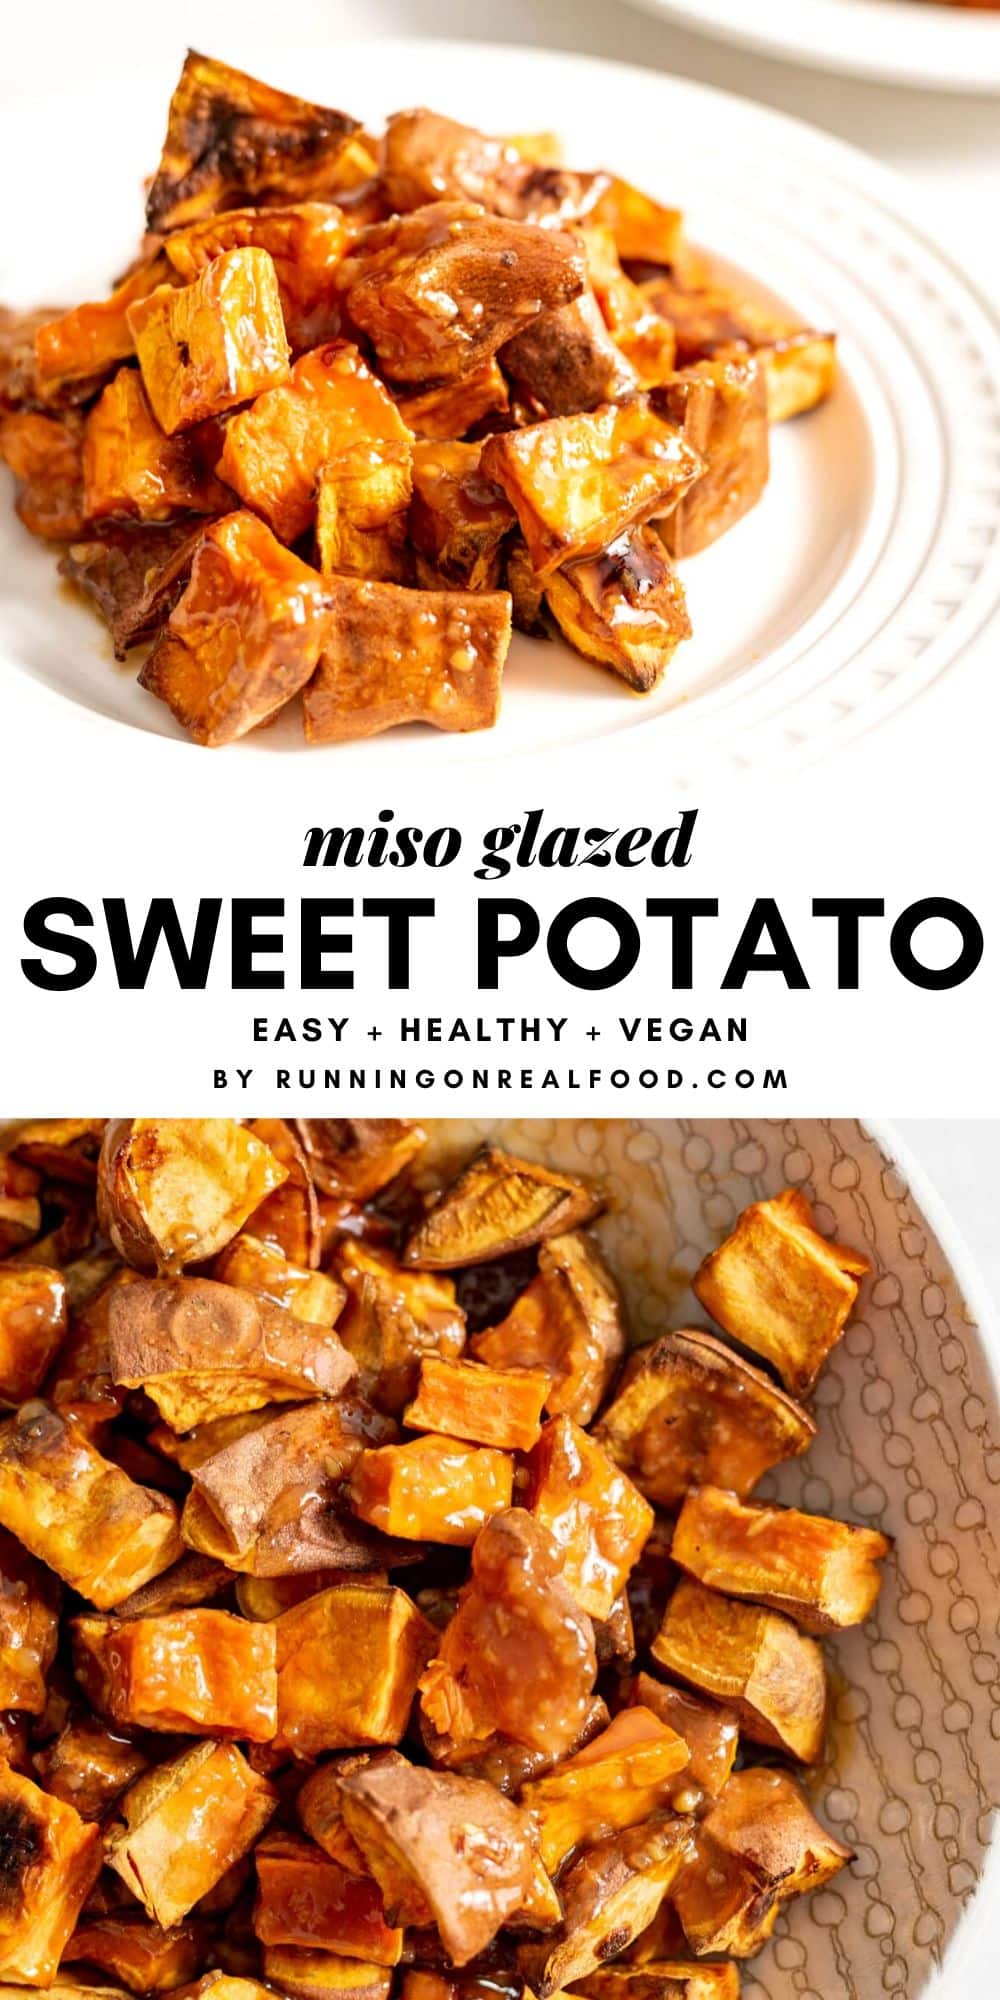 Pinterest graphic for miso glazed sweet potato with an image and a text overlay.